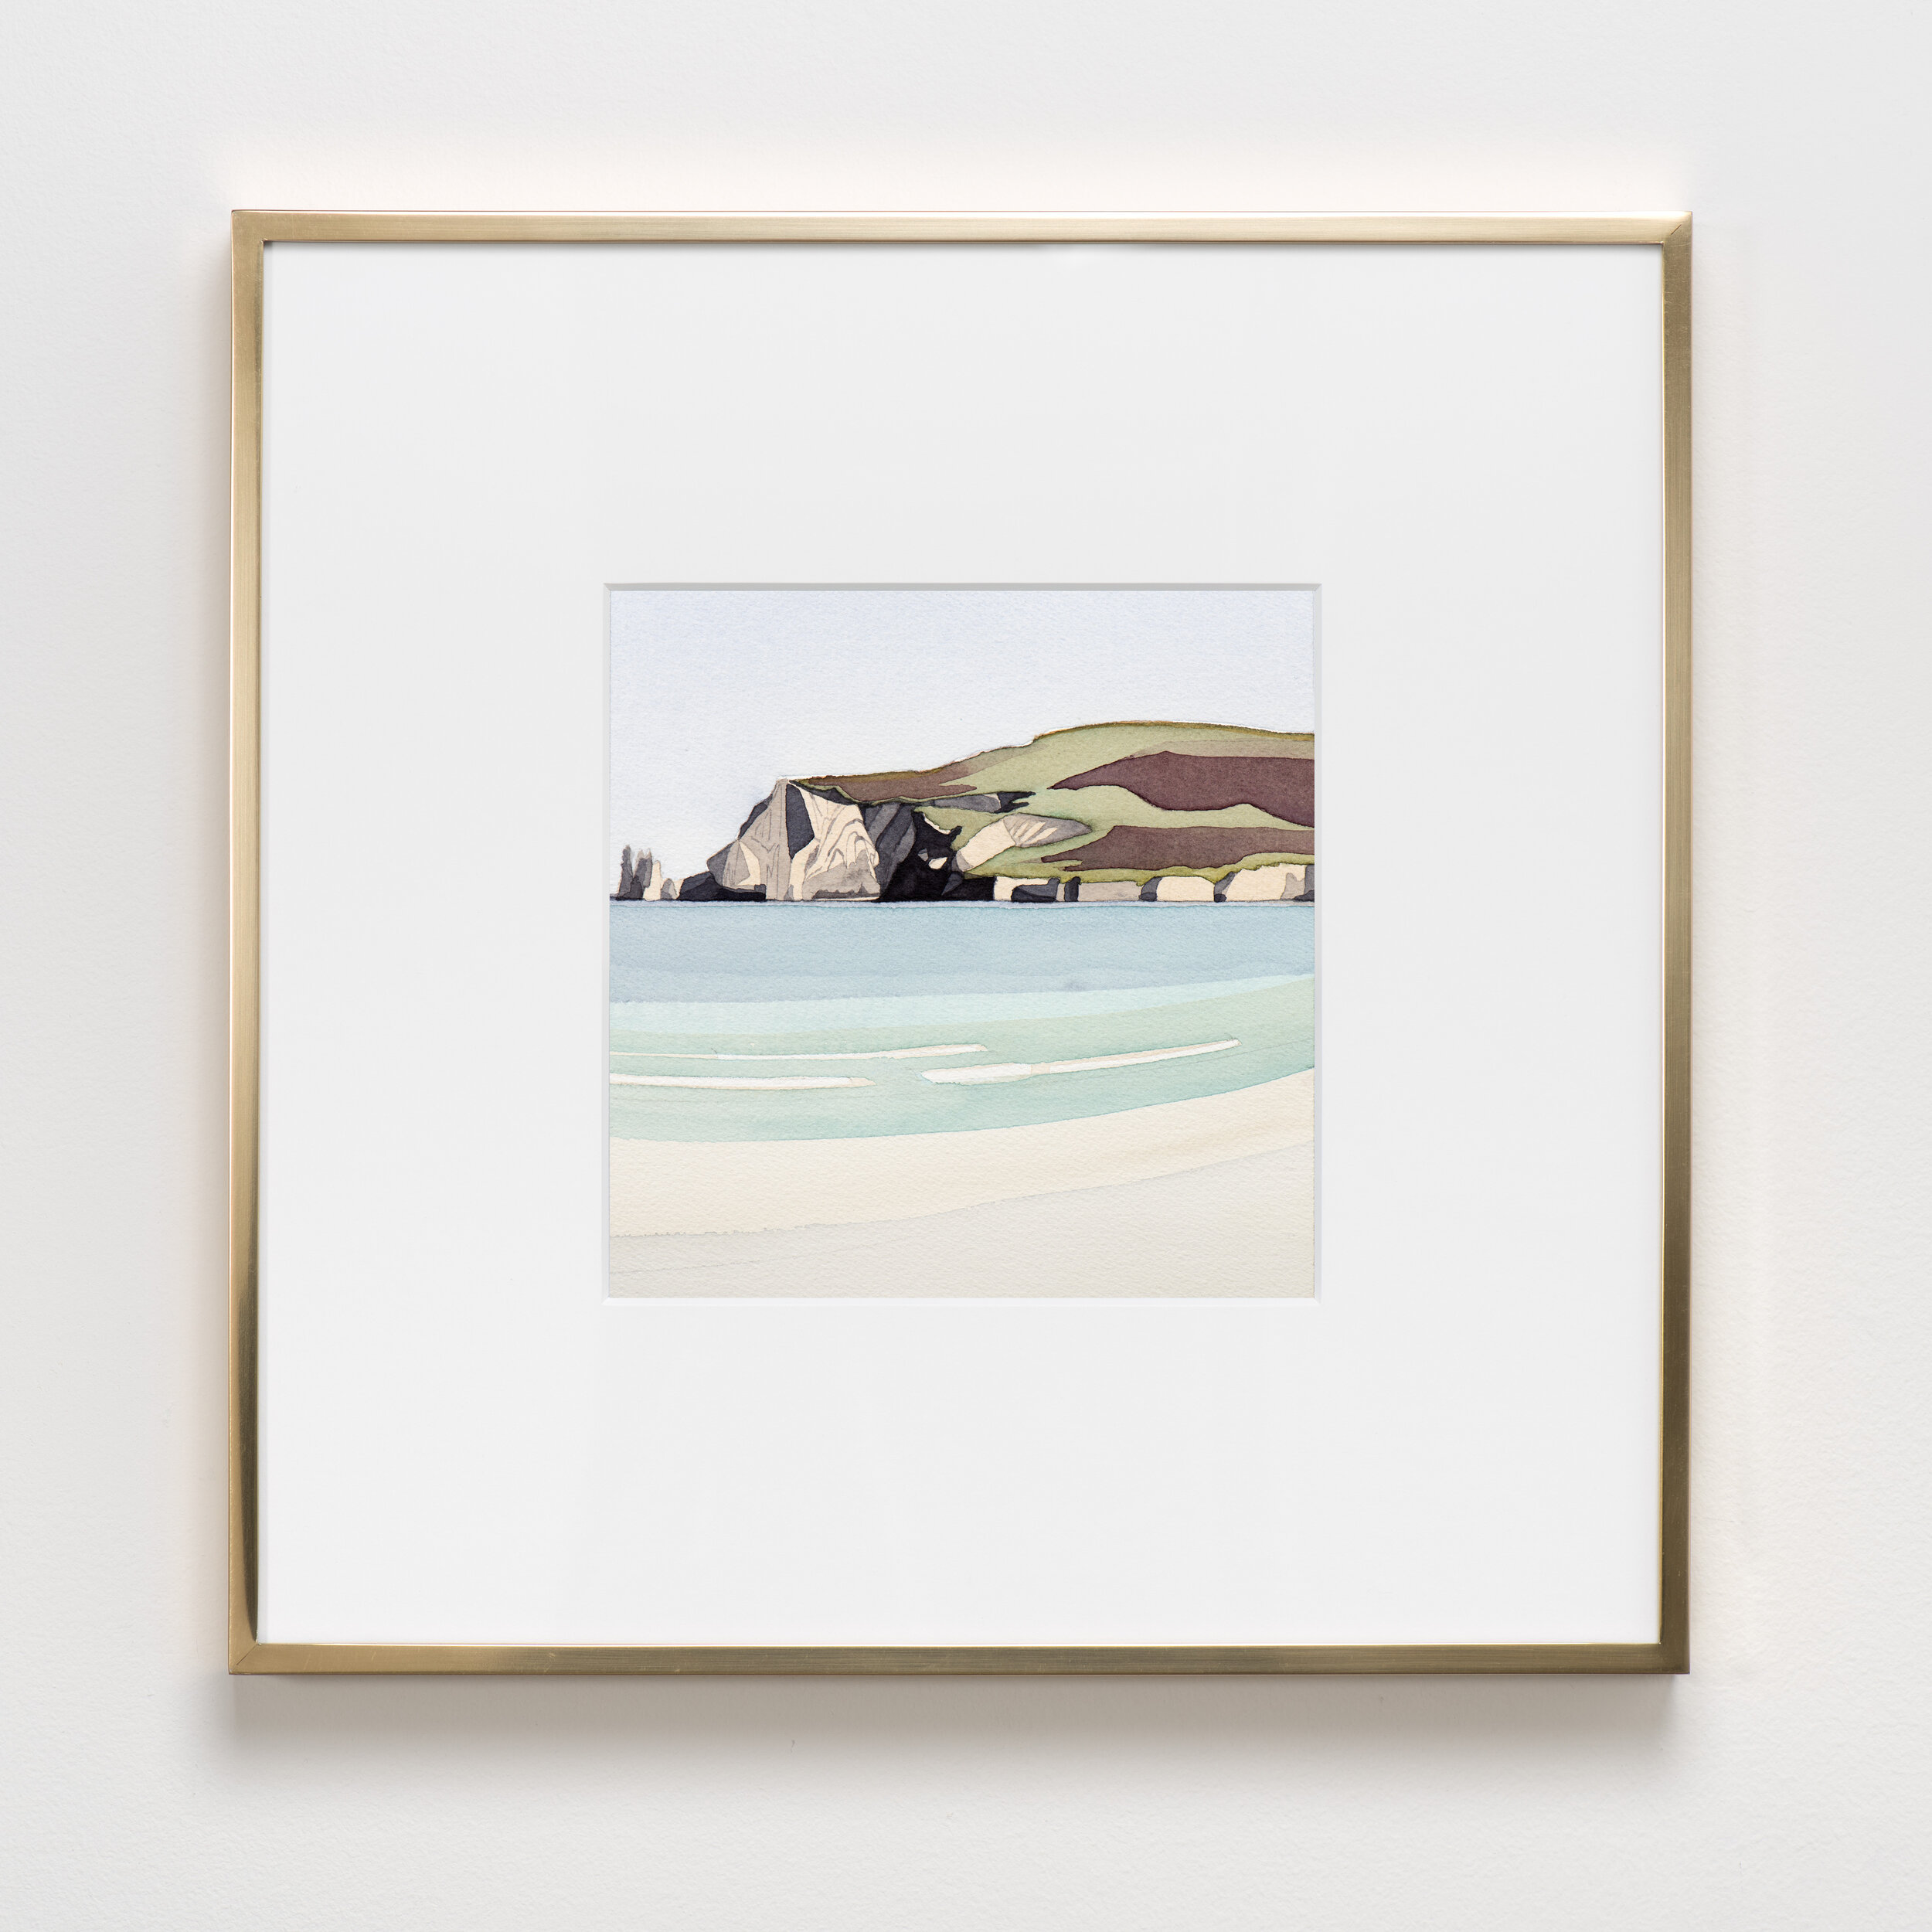   Ceannabeinne Beach , 2019 Watercolor on paper  16 1/4 x 16 1/4 x 1 1/4 inches (framed) 